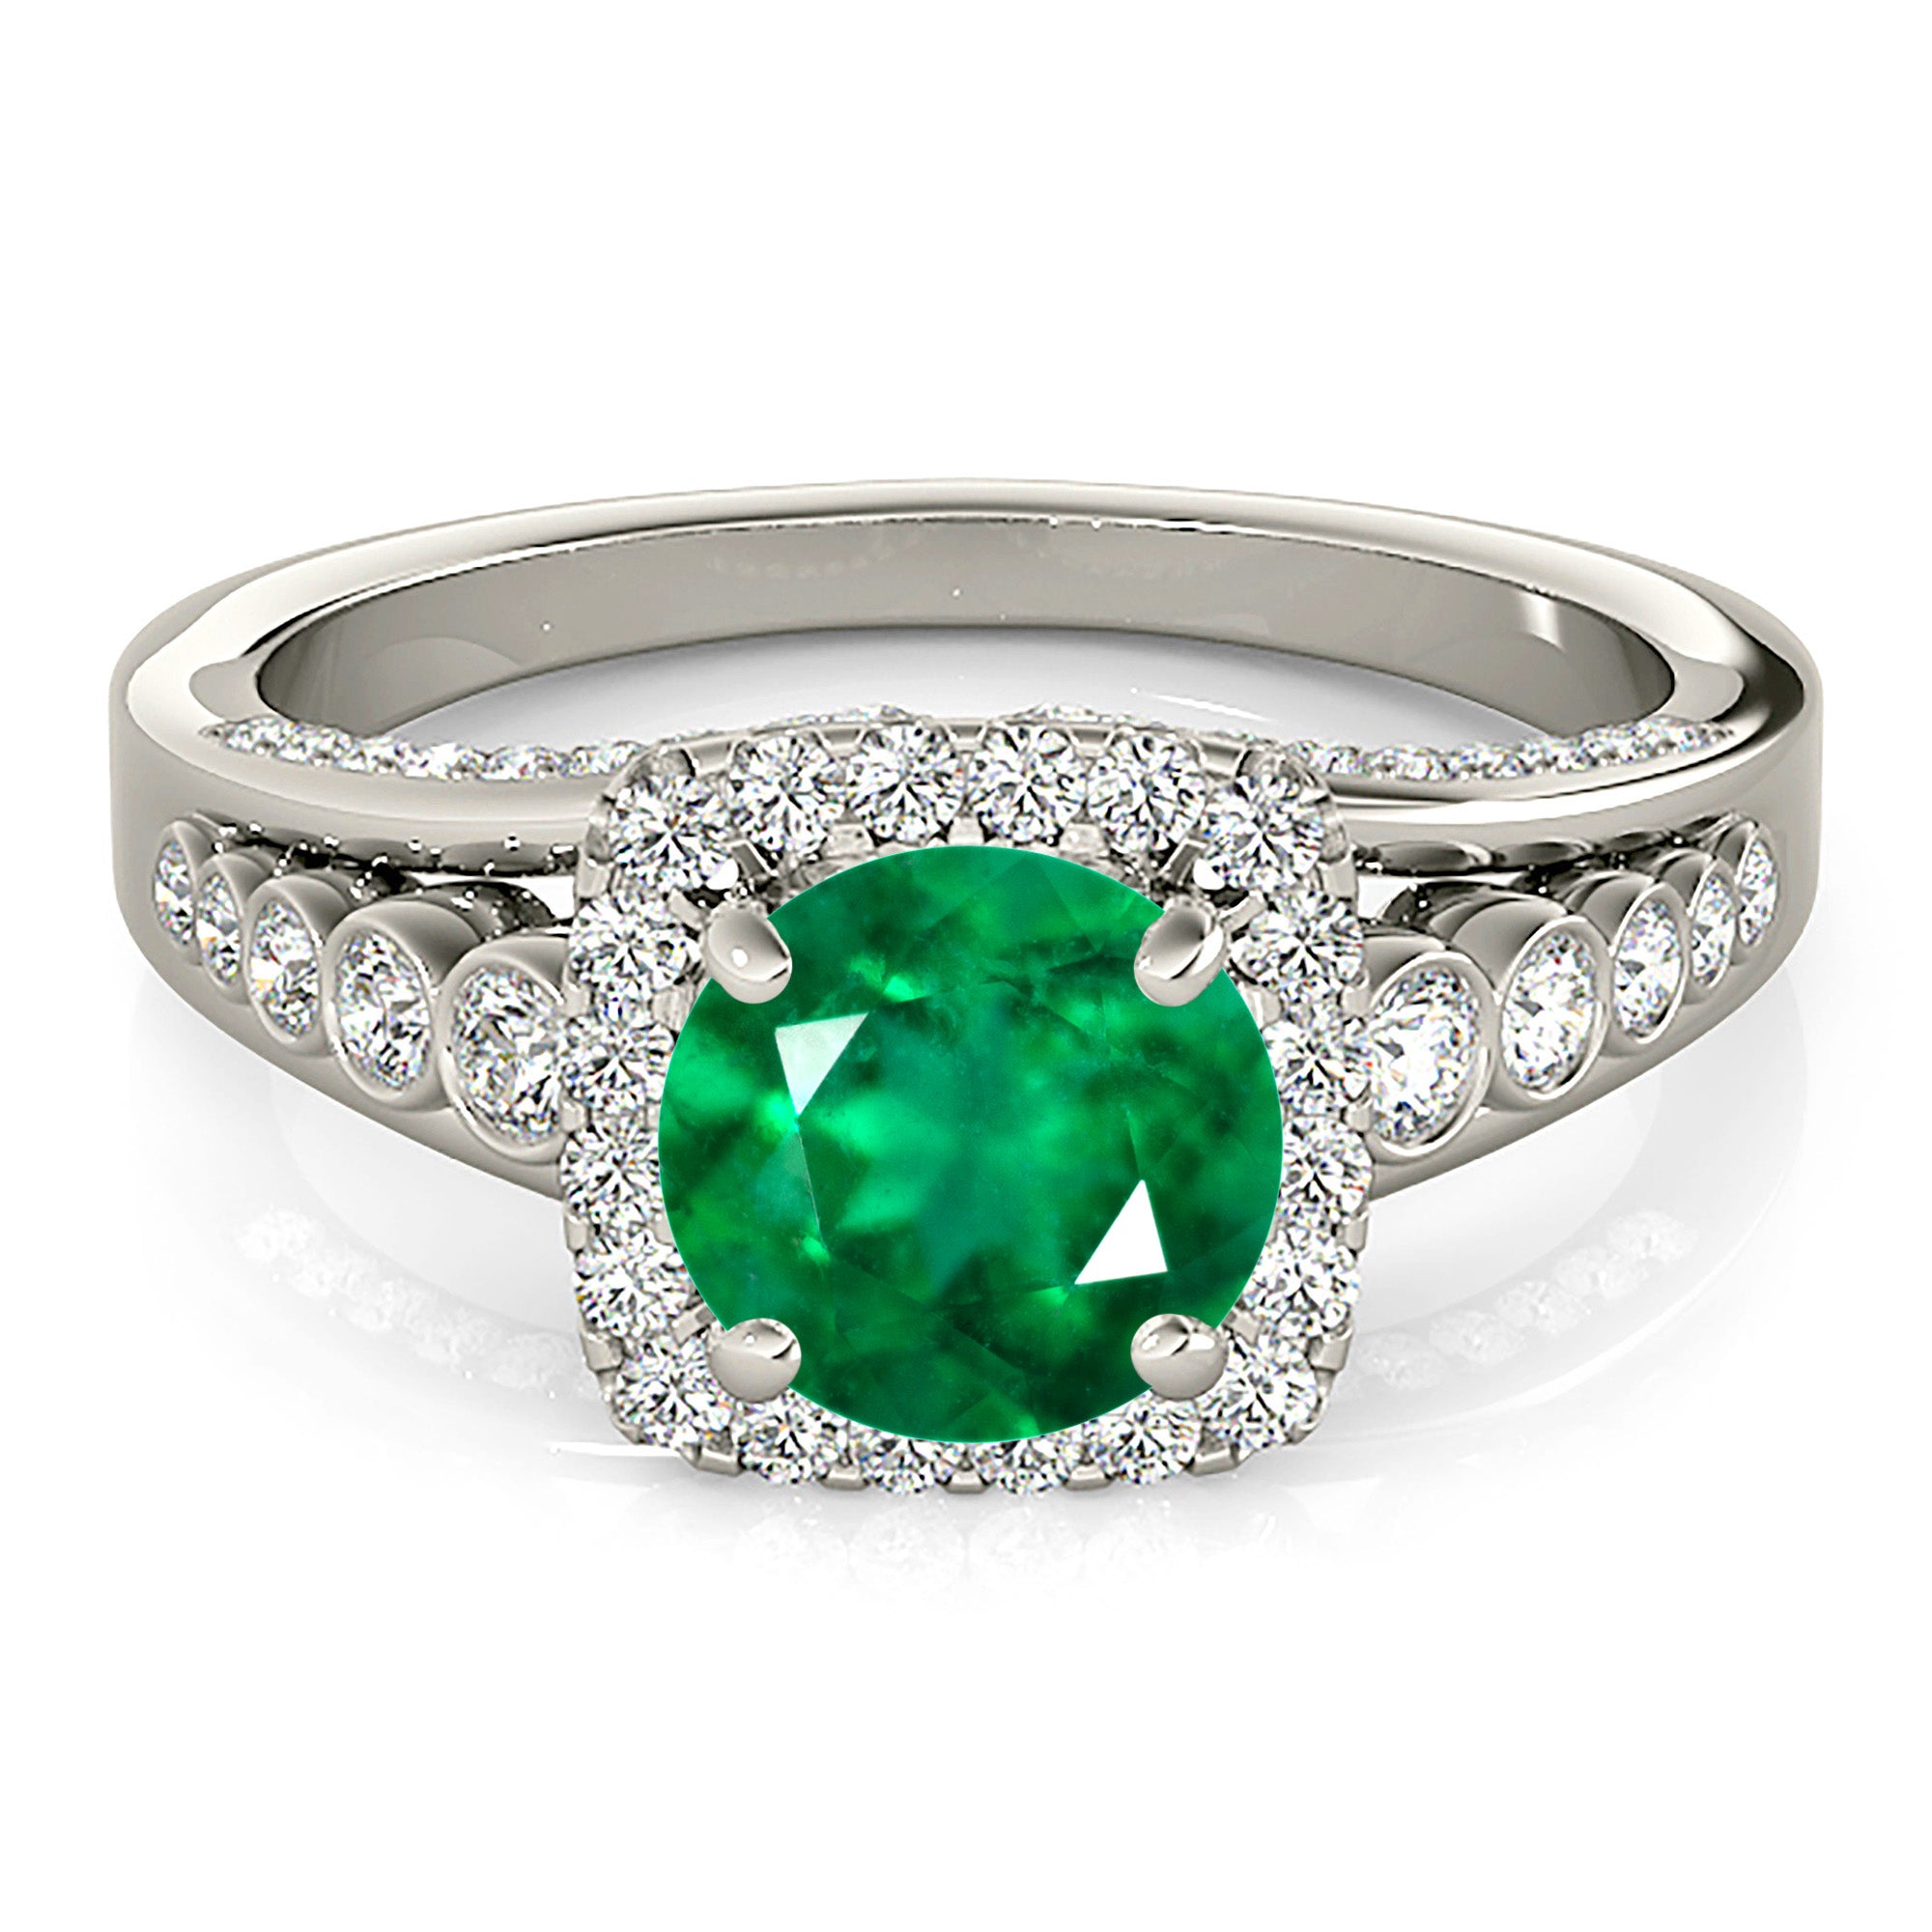 1.75 ct. Genuine Emerald Split Shank Halo Ring With 0.70 ctw. Pave and Bezel Set Side Diamonds-in 14K/18K White, Yellow, Rose Gold and Platinum - Christmas Jewelry Gift -VIRABYANI